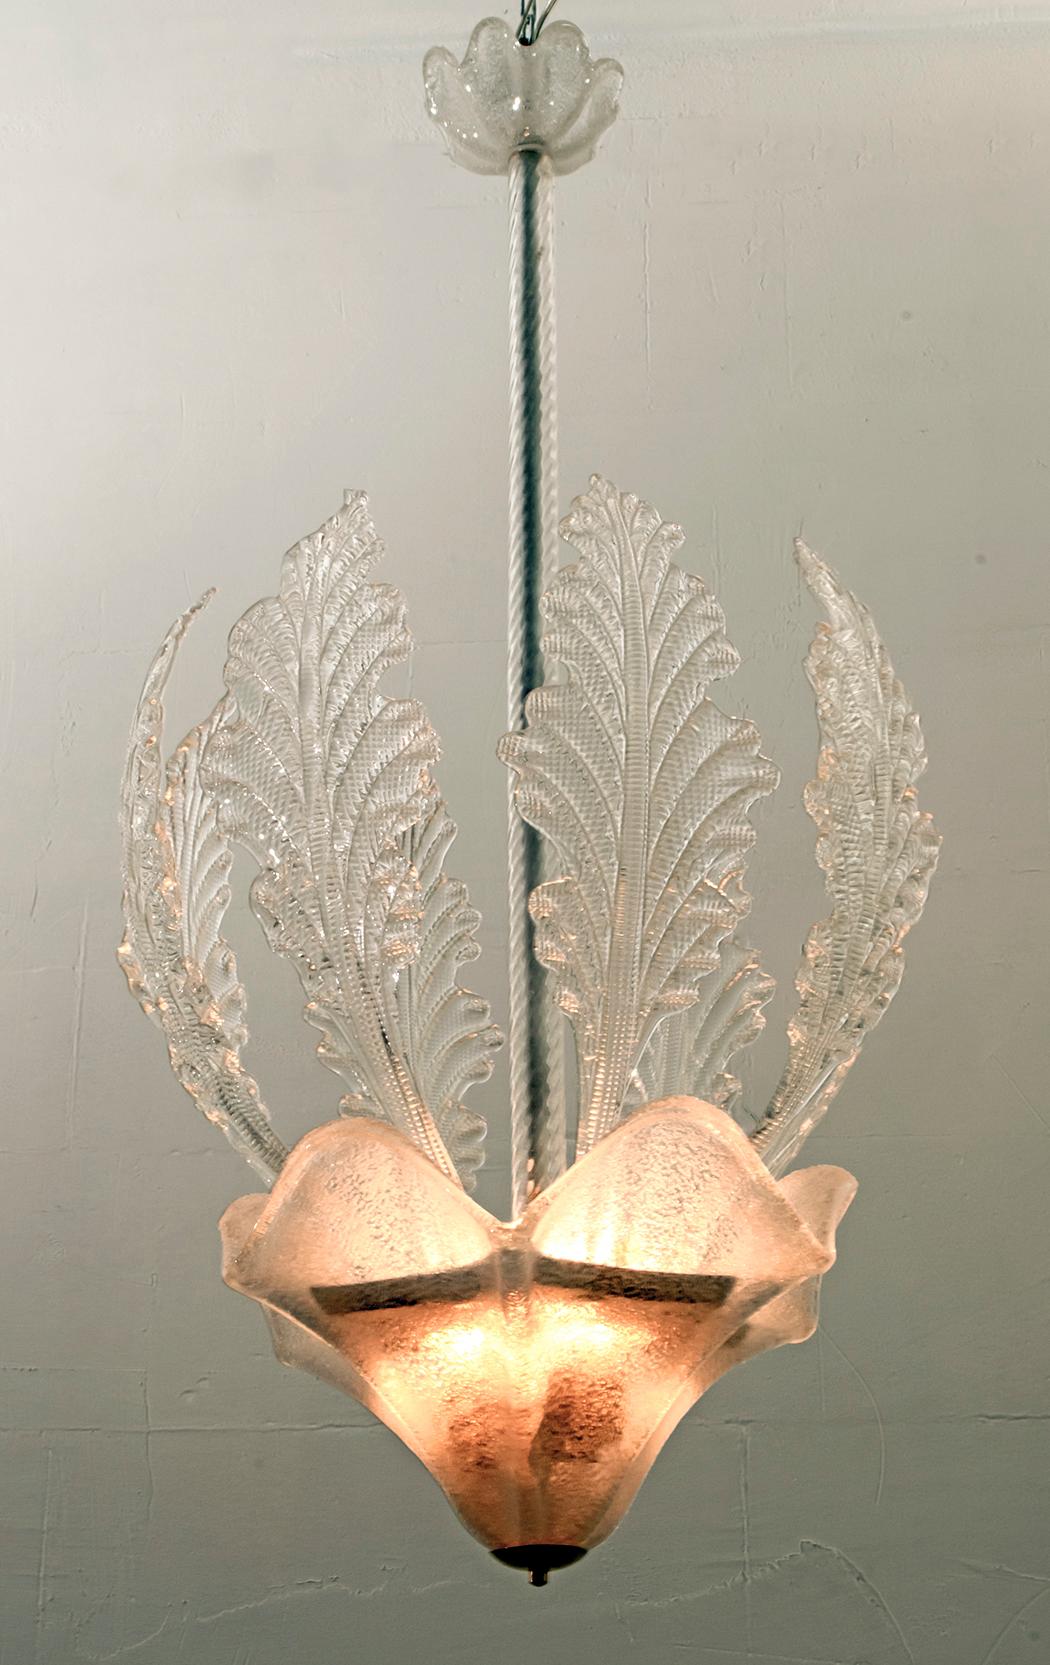 This chandelier was created by Barovier & Toso in the 1940s, it is made of grit Murano glass, made up of eight long leaves and a large cup.

Barovier's artistic glassware has existed since the mid-13th century and is therefore the sixth oldest